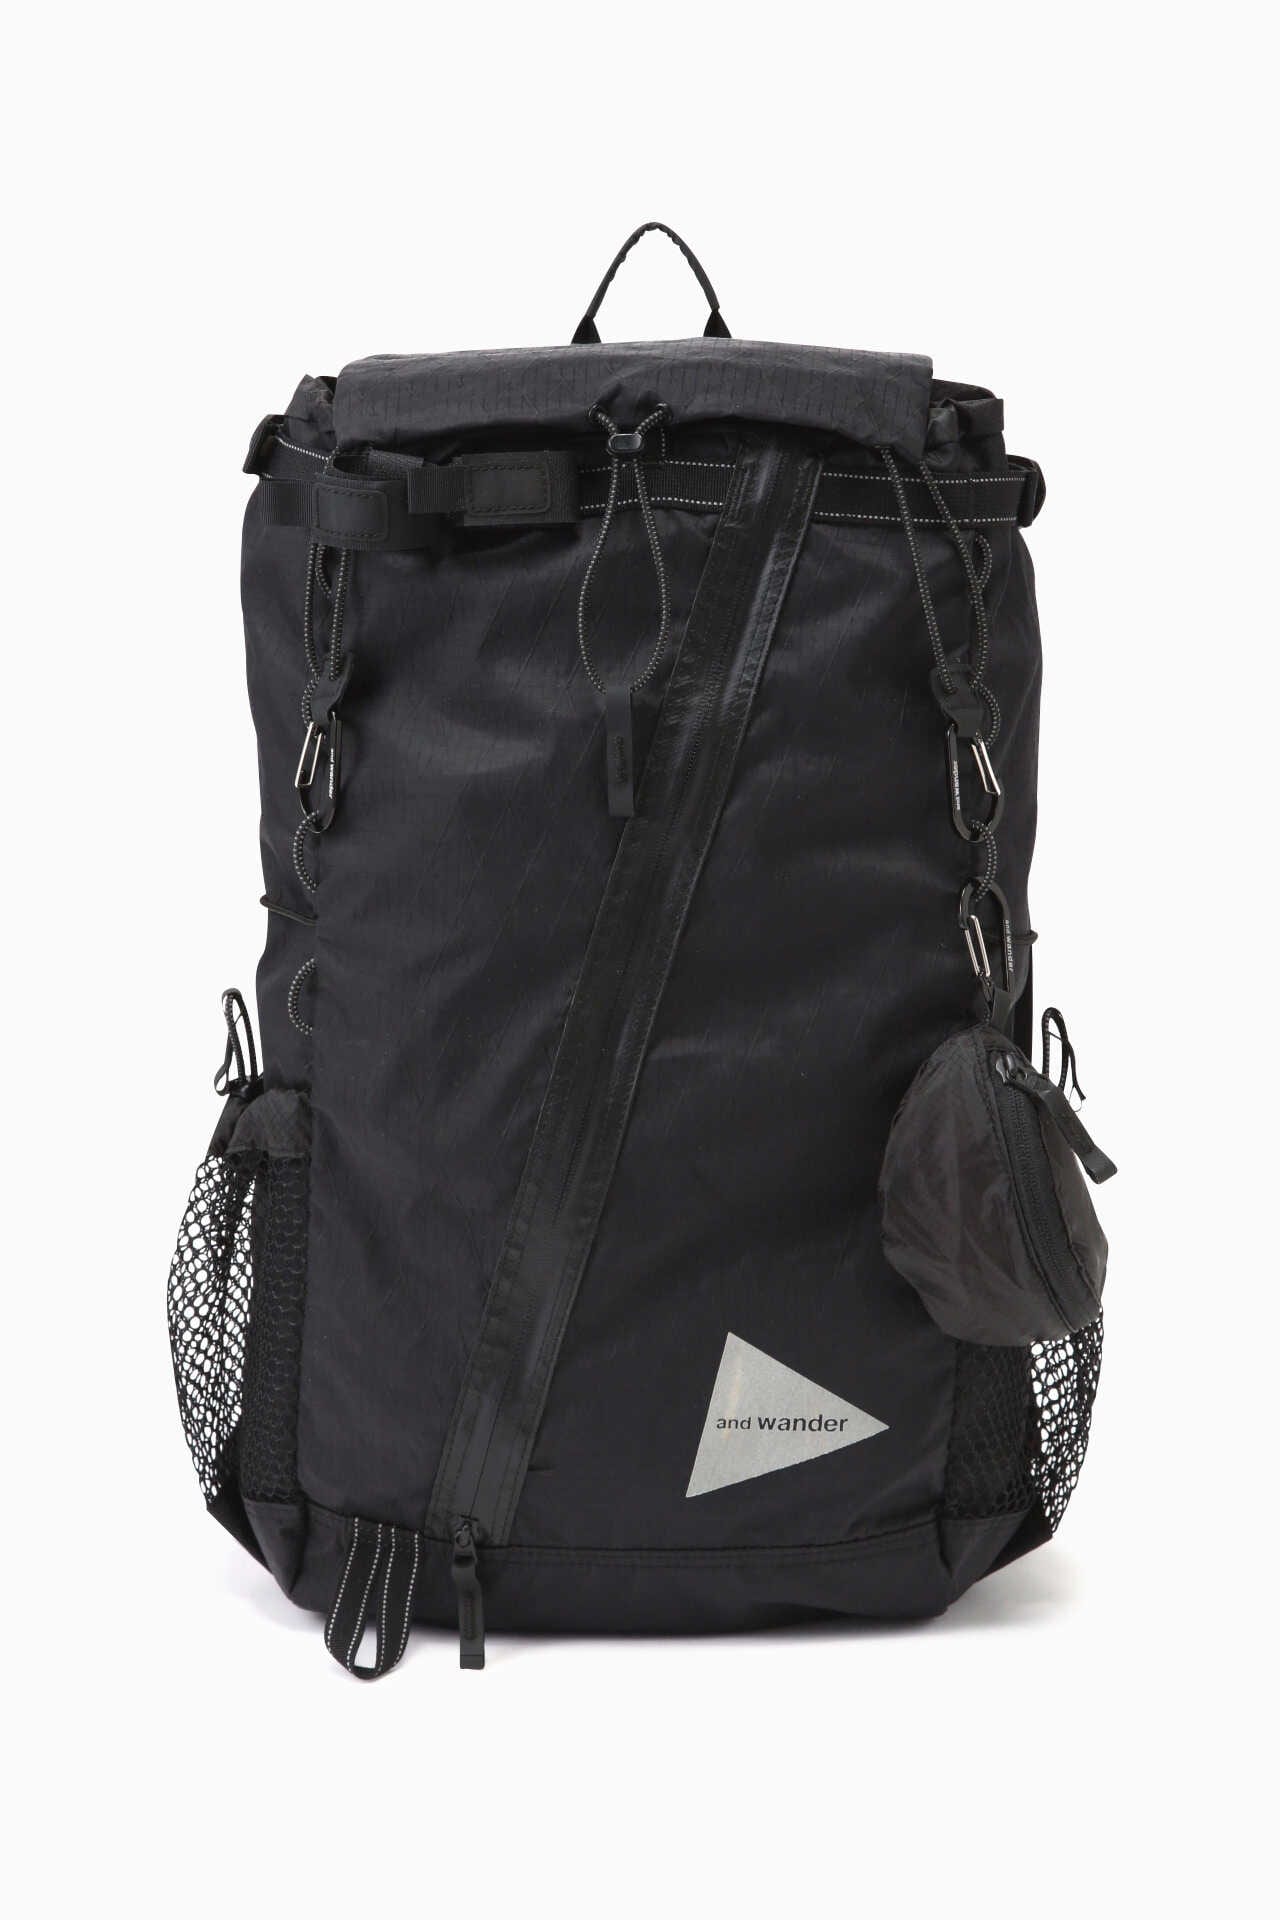 X-Pac 30L backpack | backpack | and wander ONLINE STORE